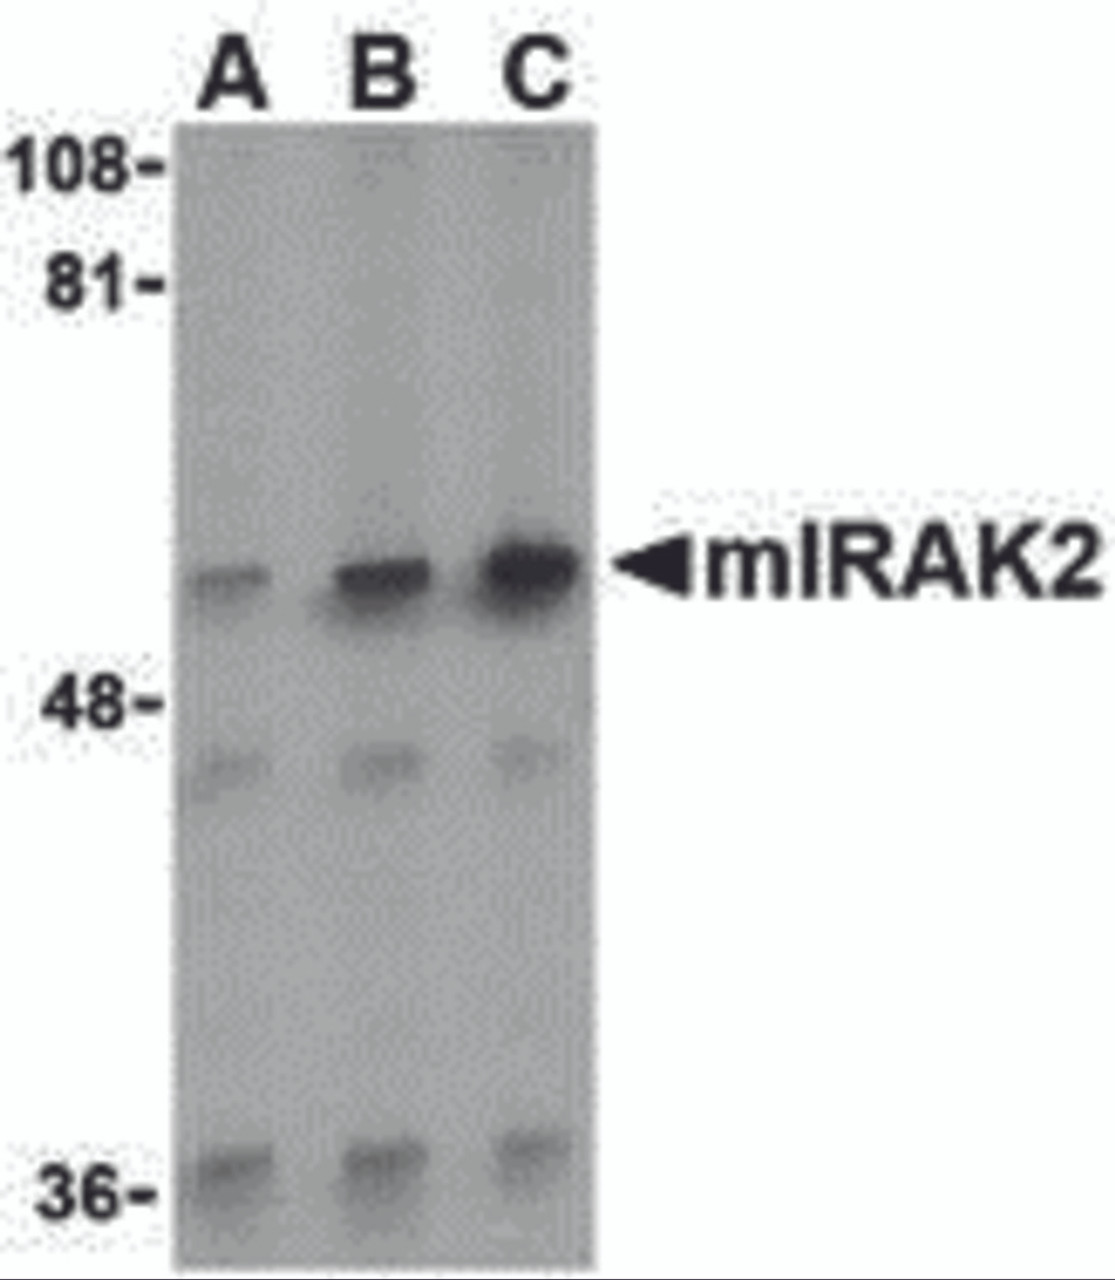 Western blot analysis of IRAK2 in A-20 whole cell lysate with IRAK2 antibody (C2) at (A) 0.5, (B) 1, and (C) 2 &#956;g/mL.